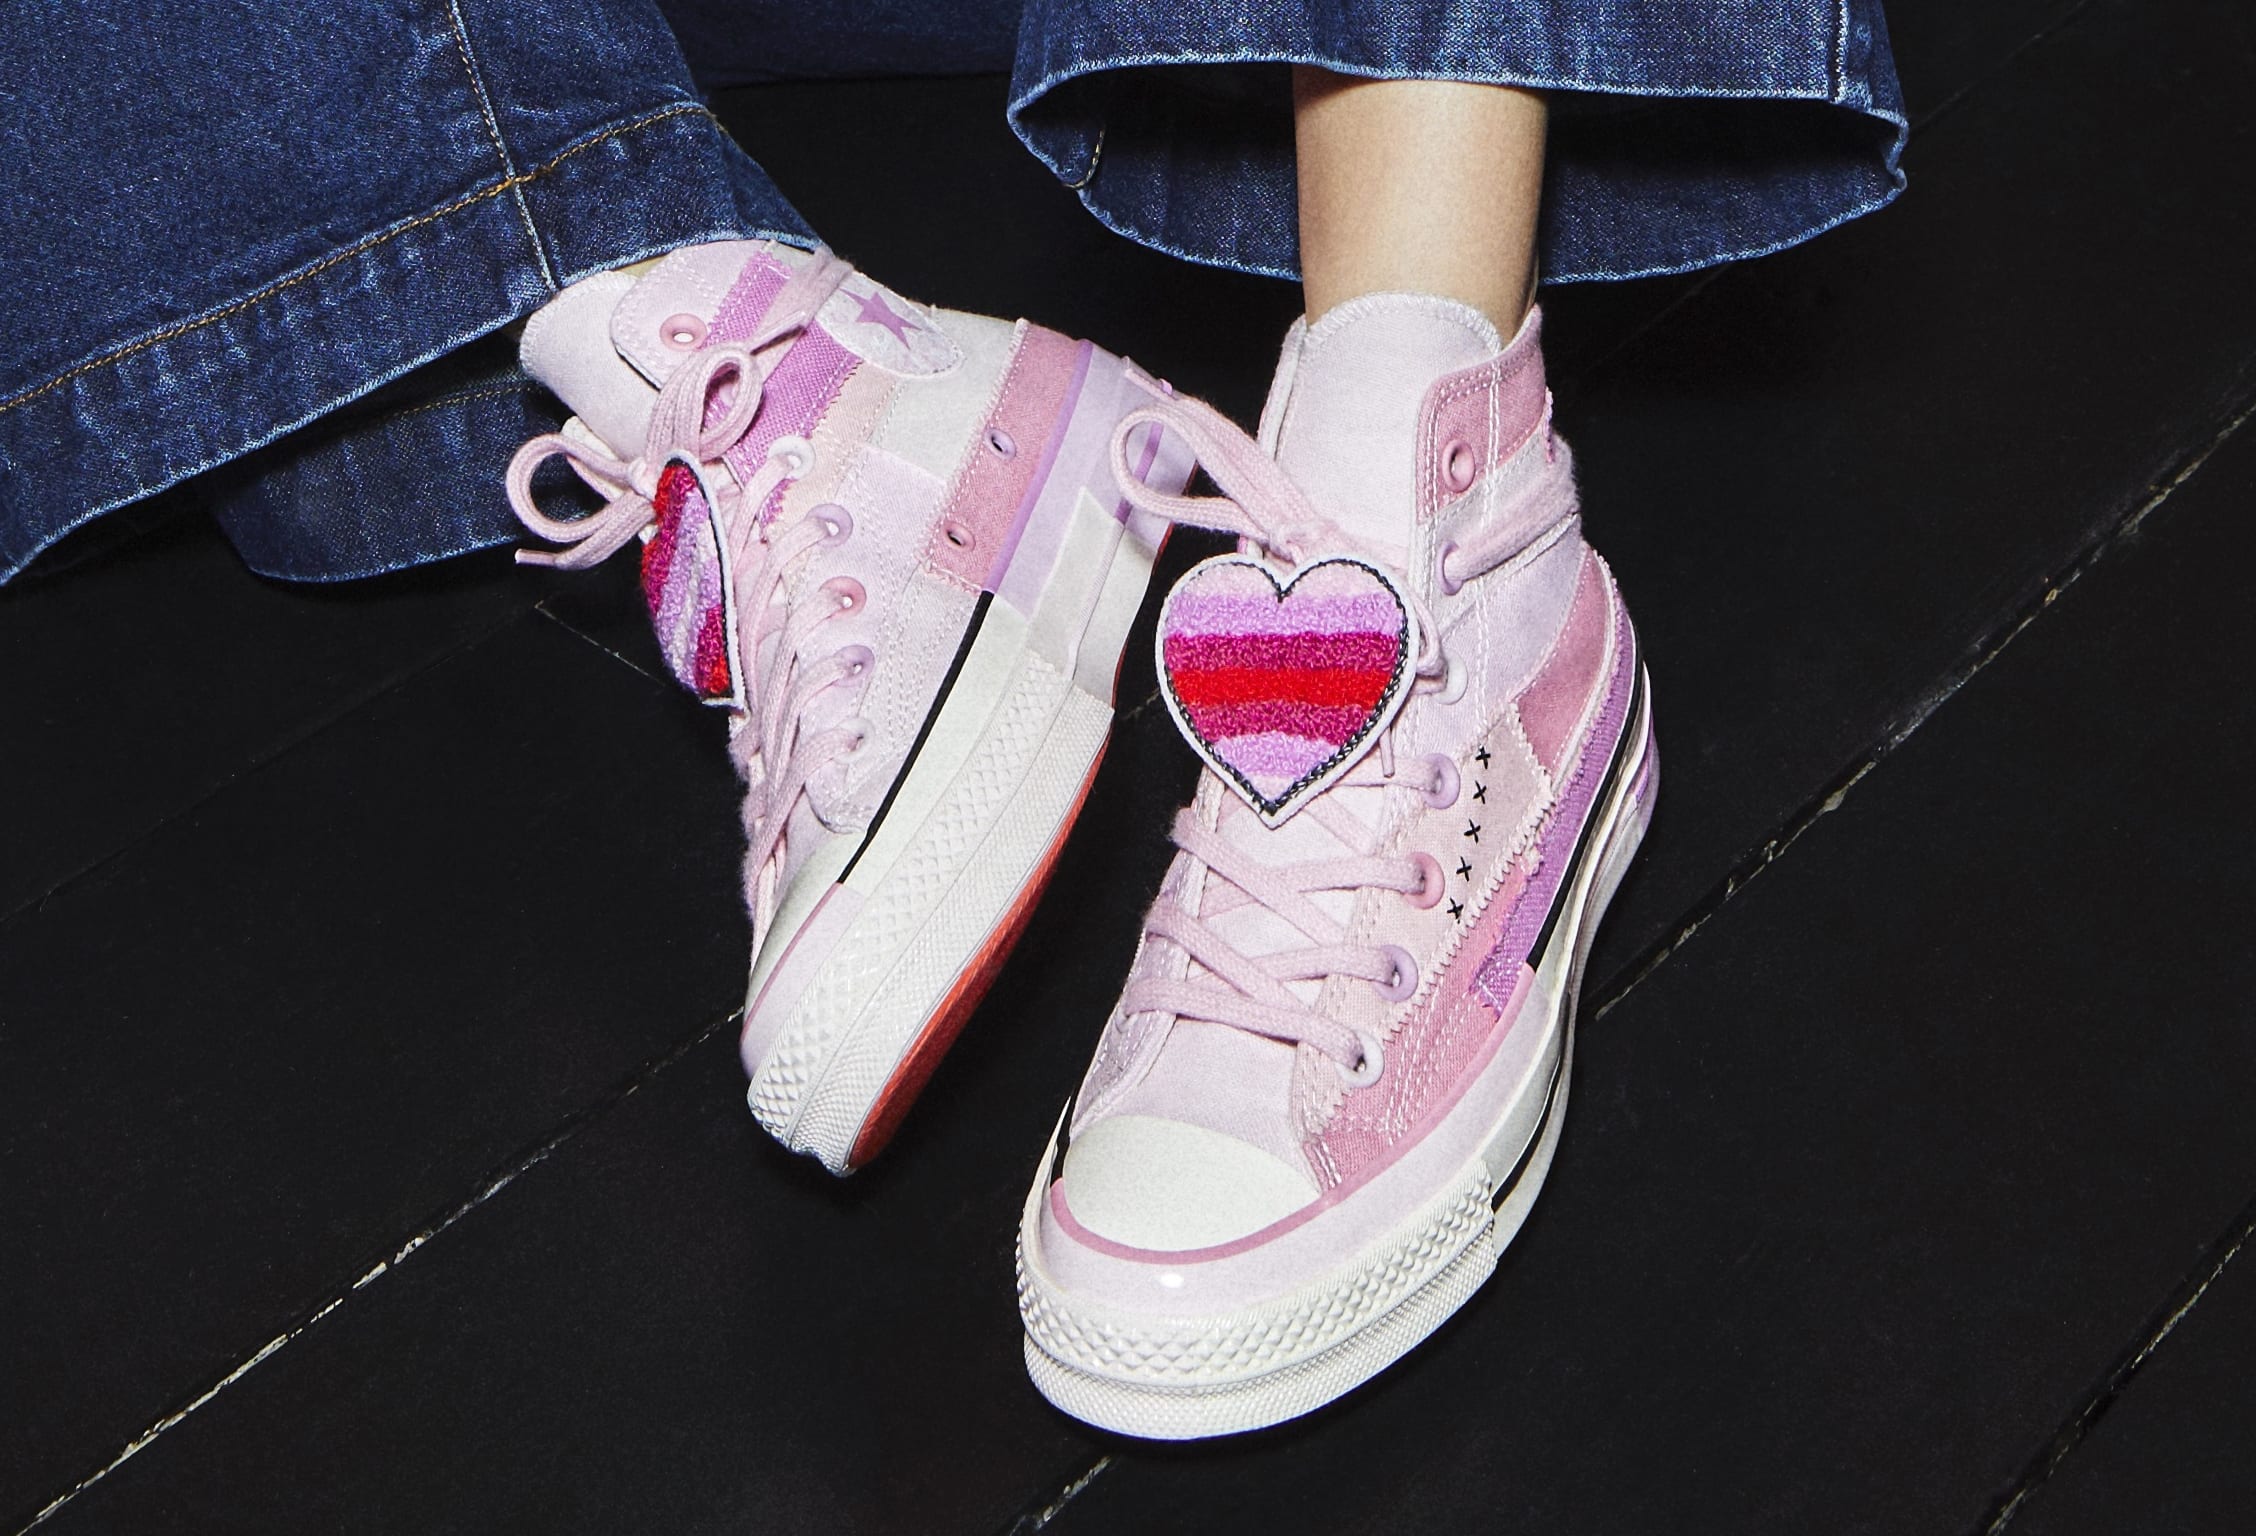 Stranger Things' Star Millie Bobby Brown Announces Converse Collaboration